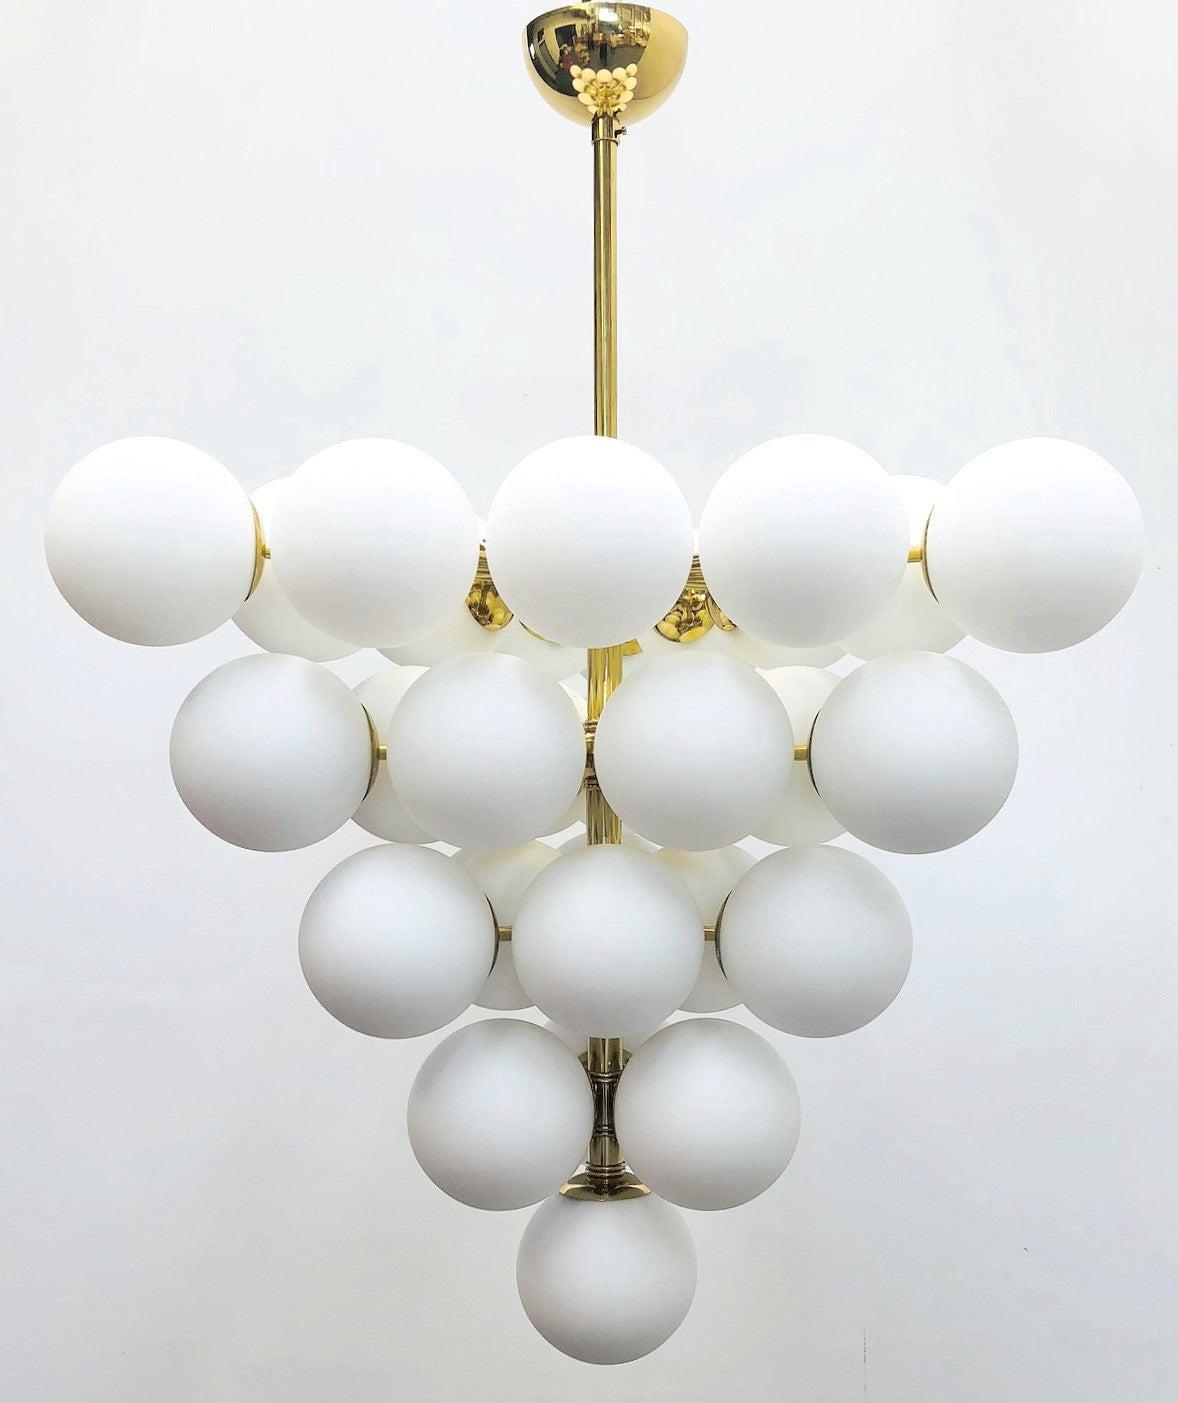 Italian chandelier with matte white Murano glass globes mounted on polished brass frame / designed by Fabio Bergomi for Fabio Ltd, made in Italy
31-light / E12 or E14 type / max 40W each
Measures: Diameter 31.5 inches, height 31.5 inches not